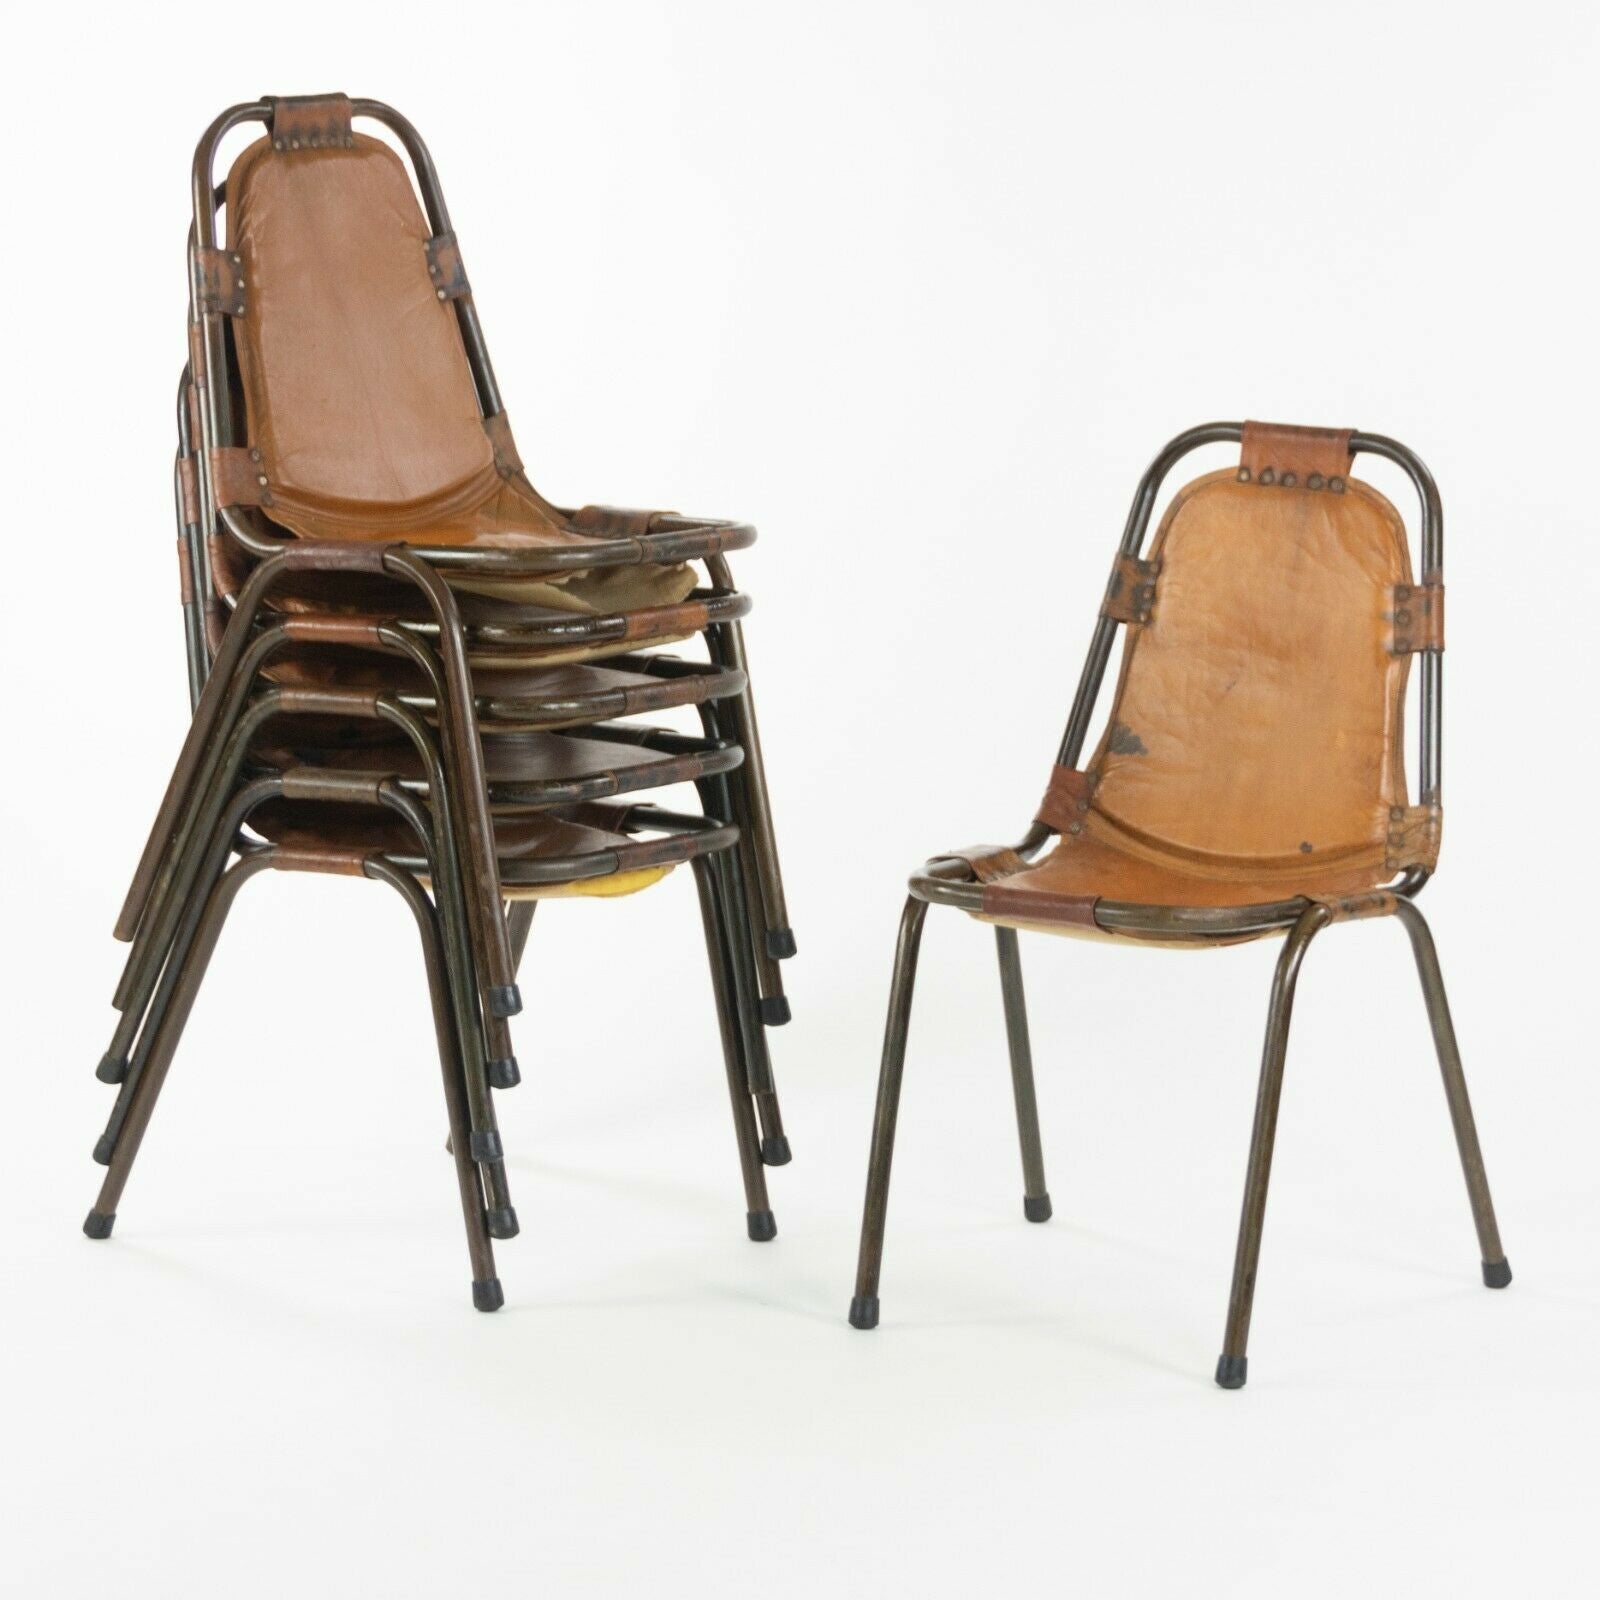 Charlotte Perriand Les Arcs Chairs - copycatchic